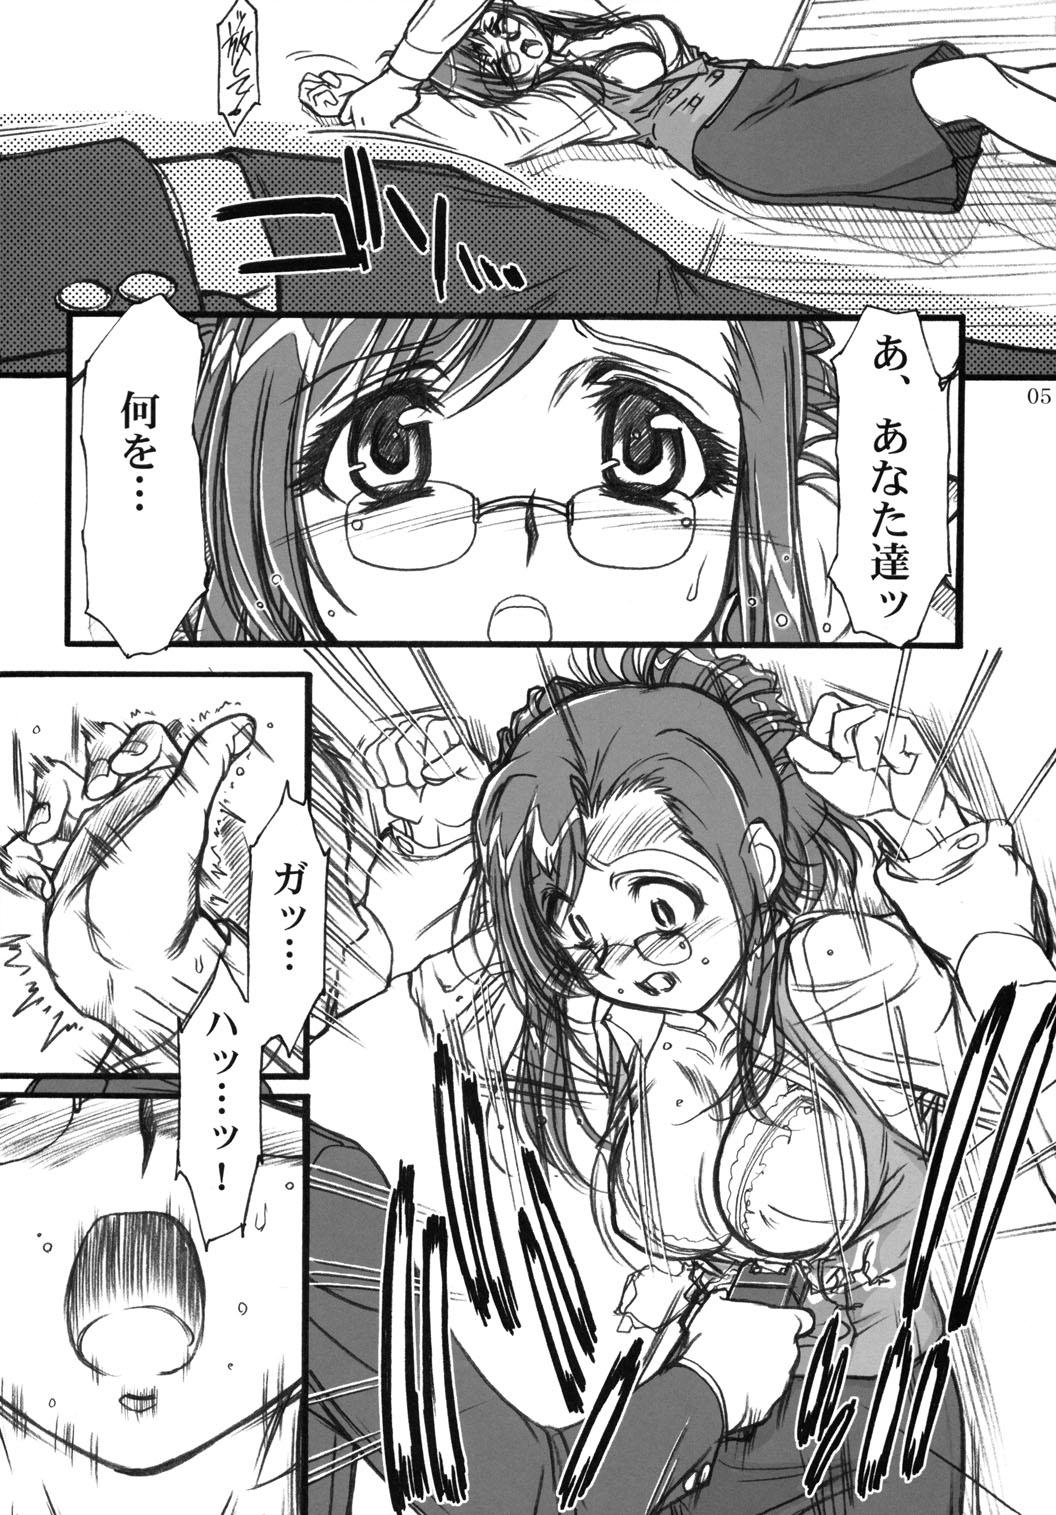 Movies S.F.F vol.1 - Onegai teacher Whipping - Page 4